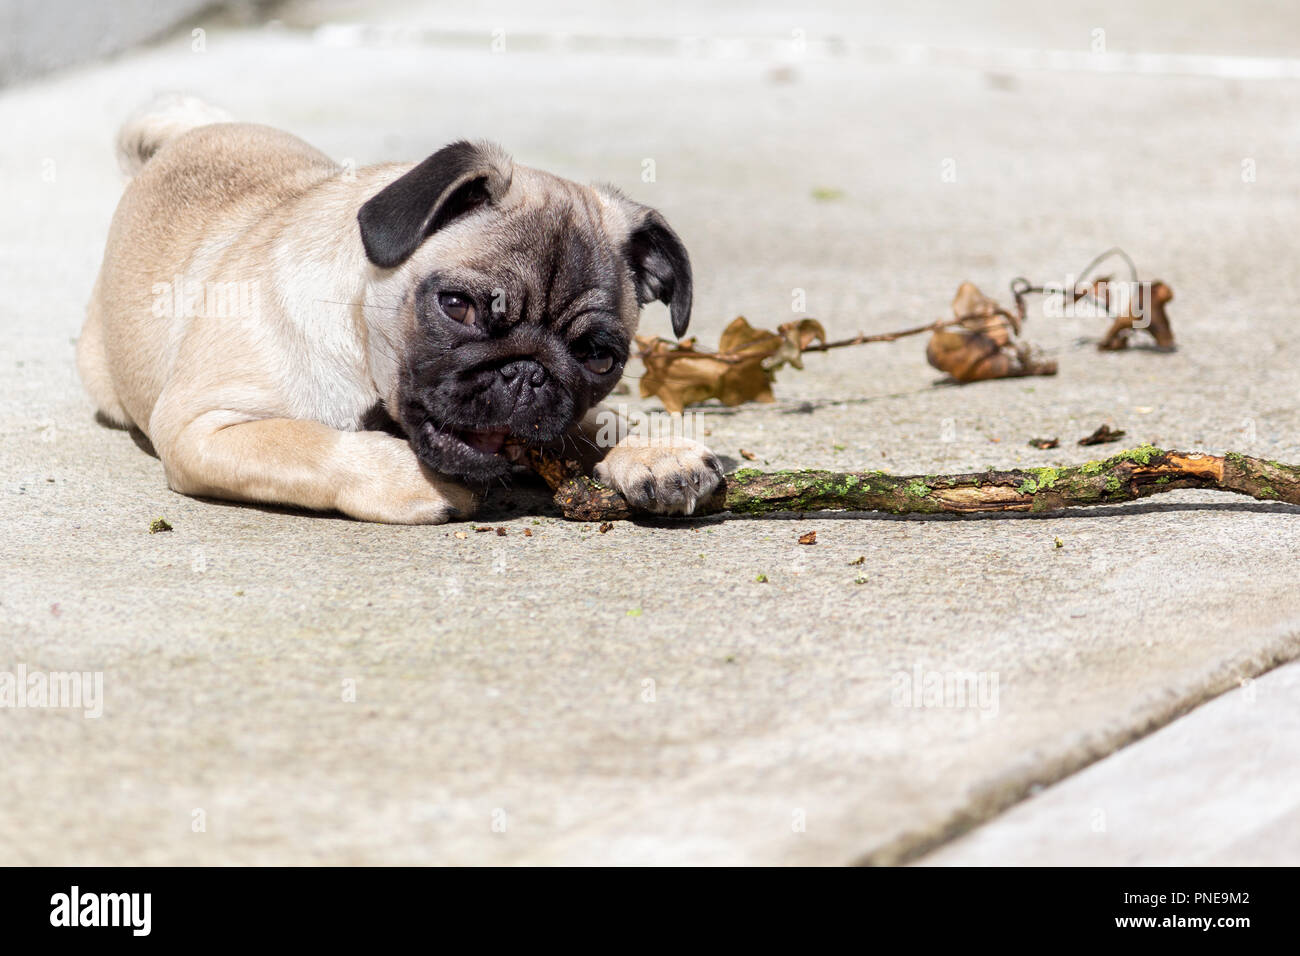 Cute Pug Puppy Chewing on a Stick Stock Photo